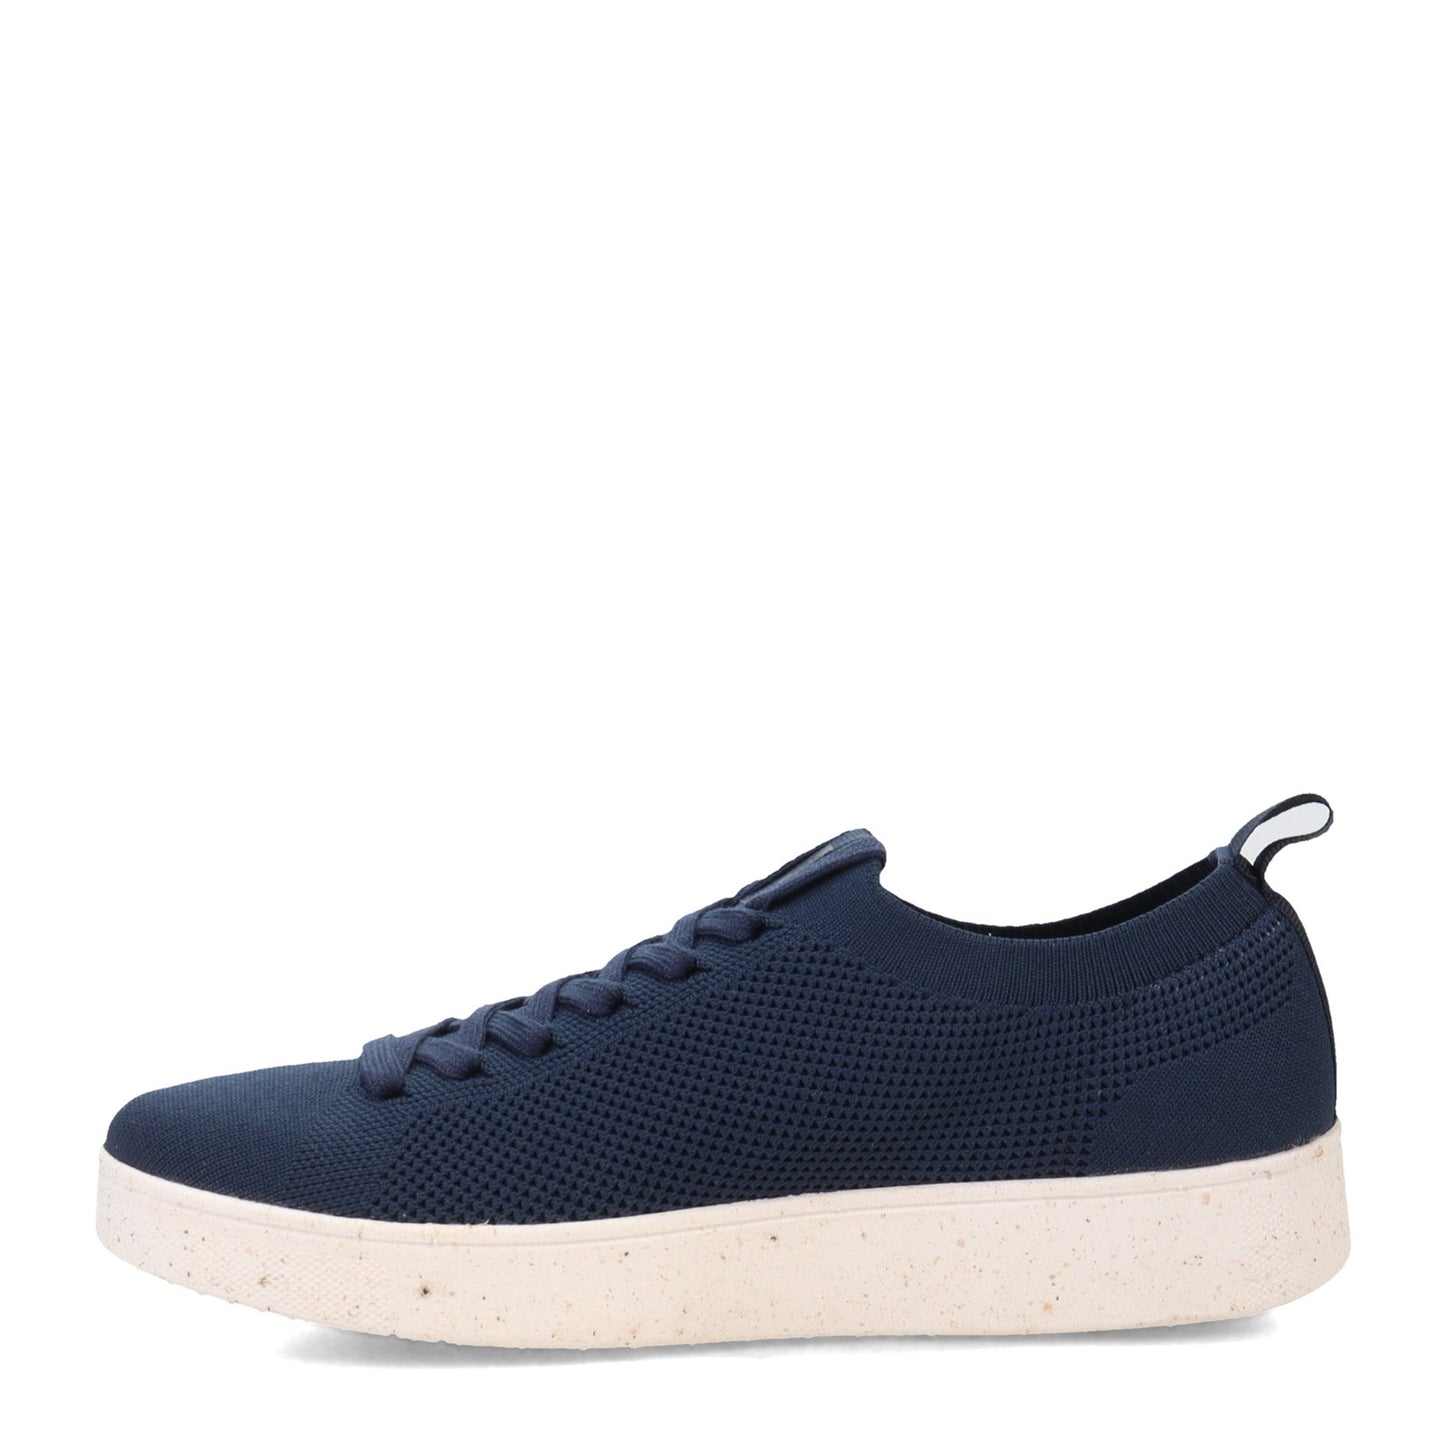 FITFLOP RALLY SNEAKER IN NAVY